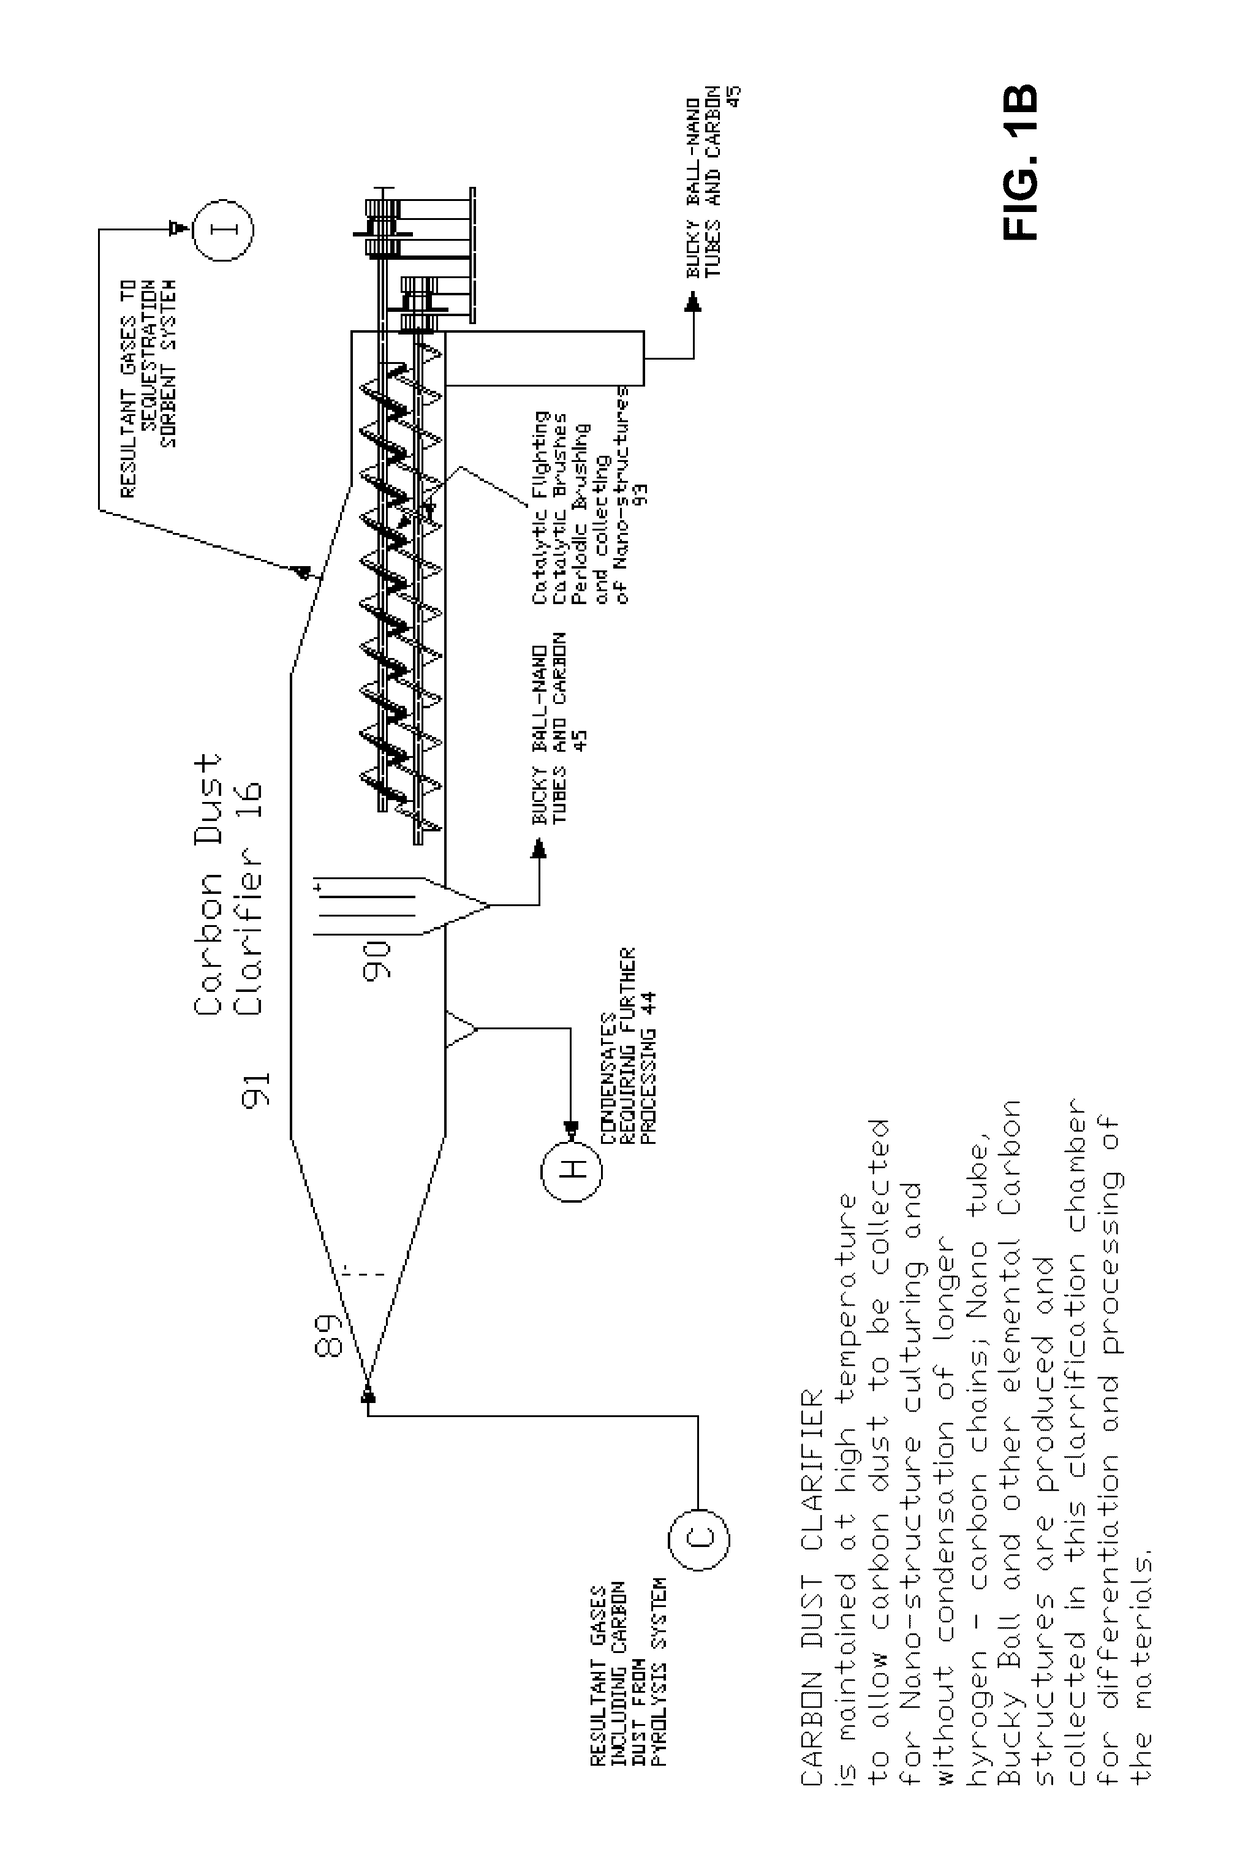 Pyrolysis and gasification systems, methods, and resultants derived therefrom